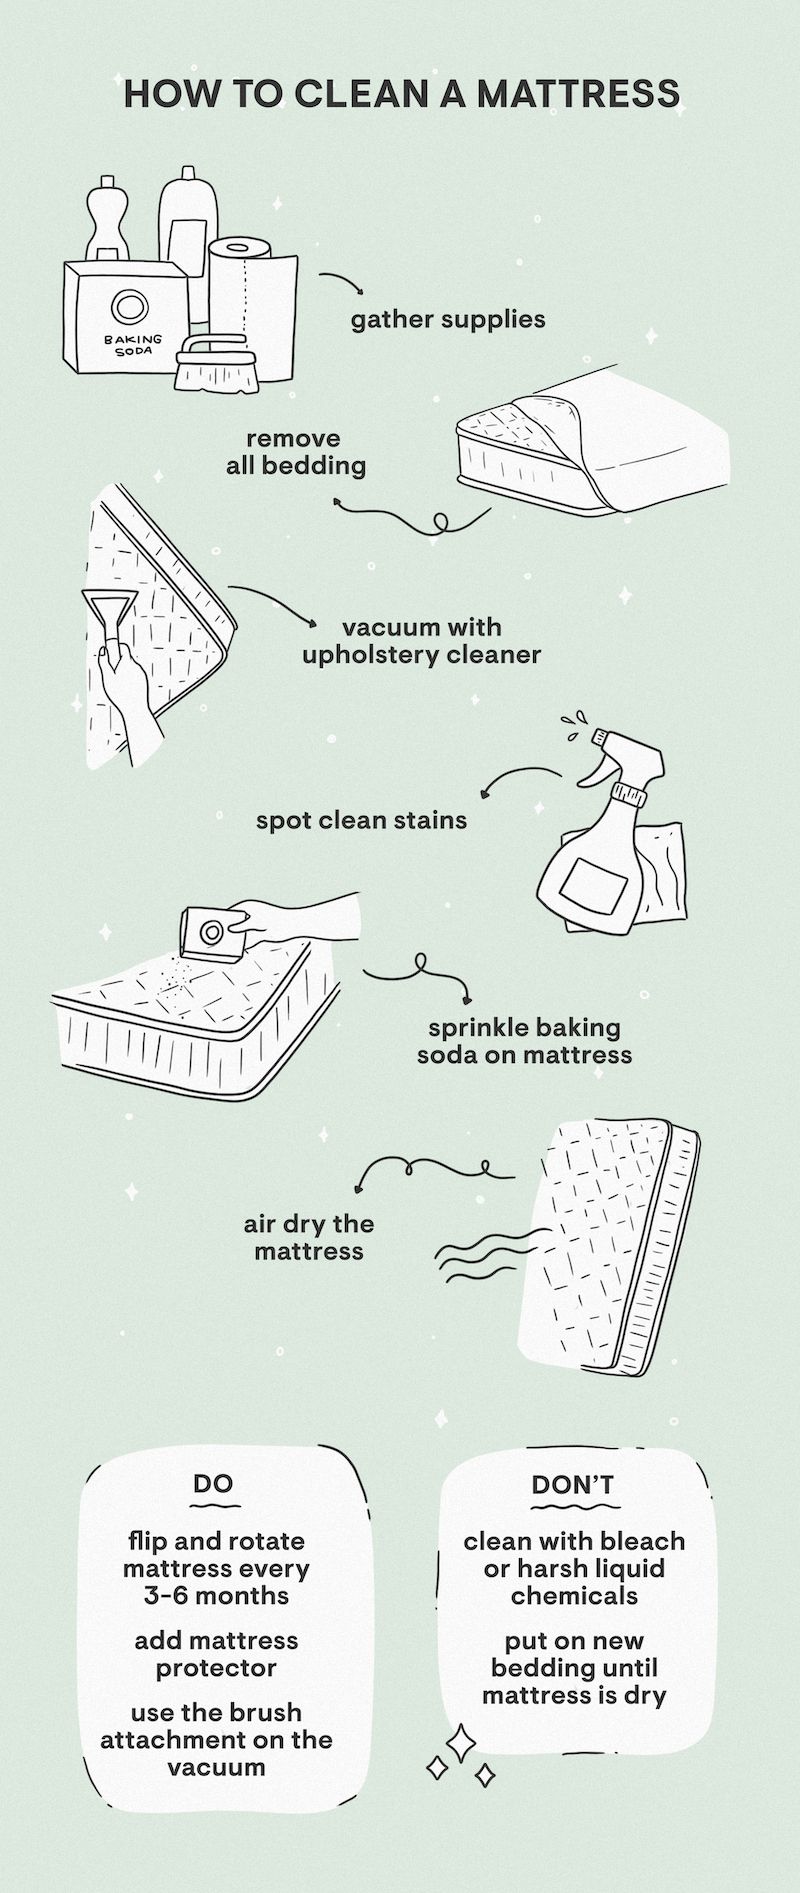 how to clean a mattress graphic